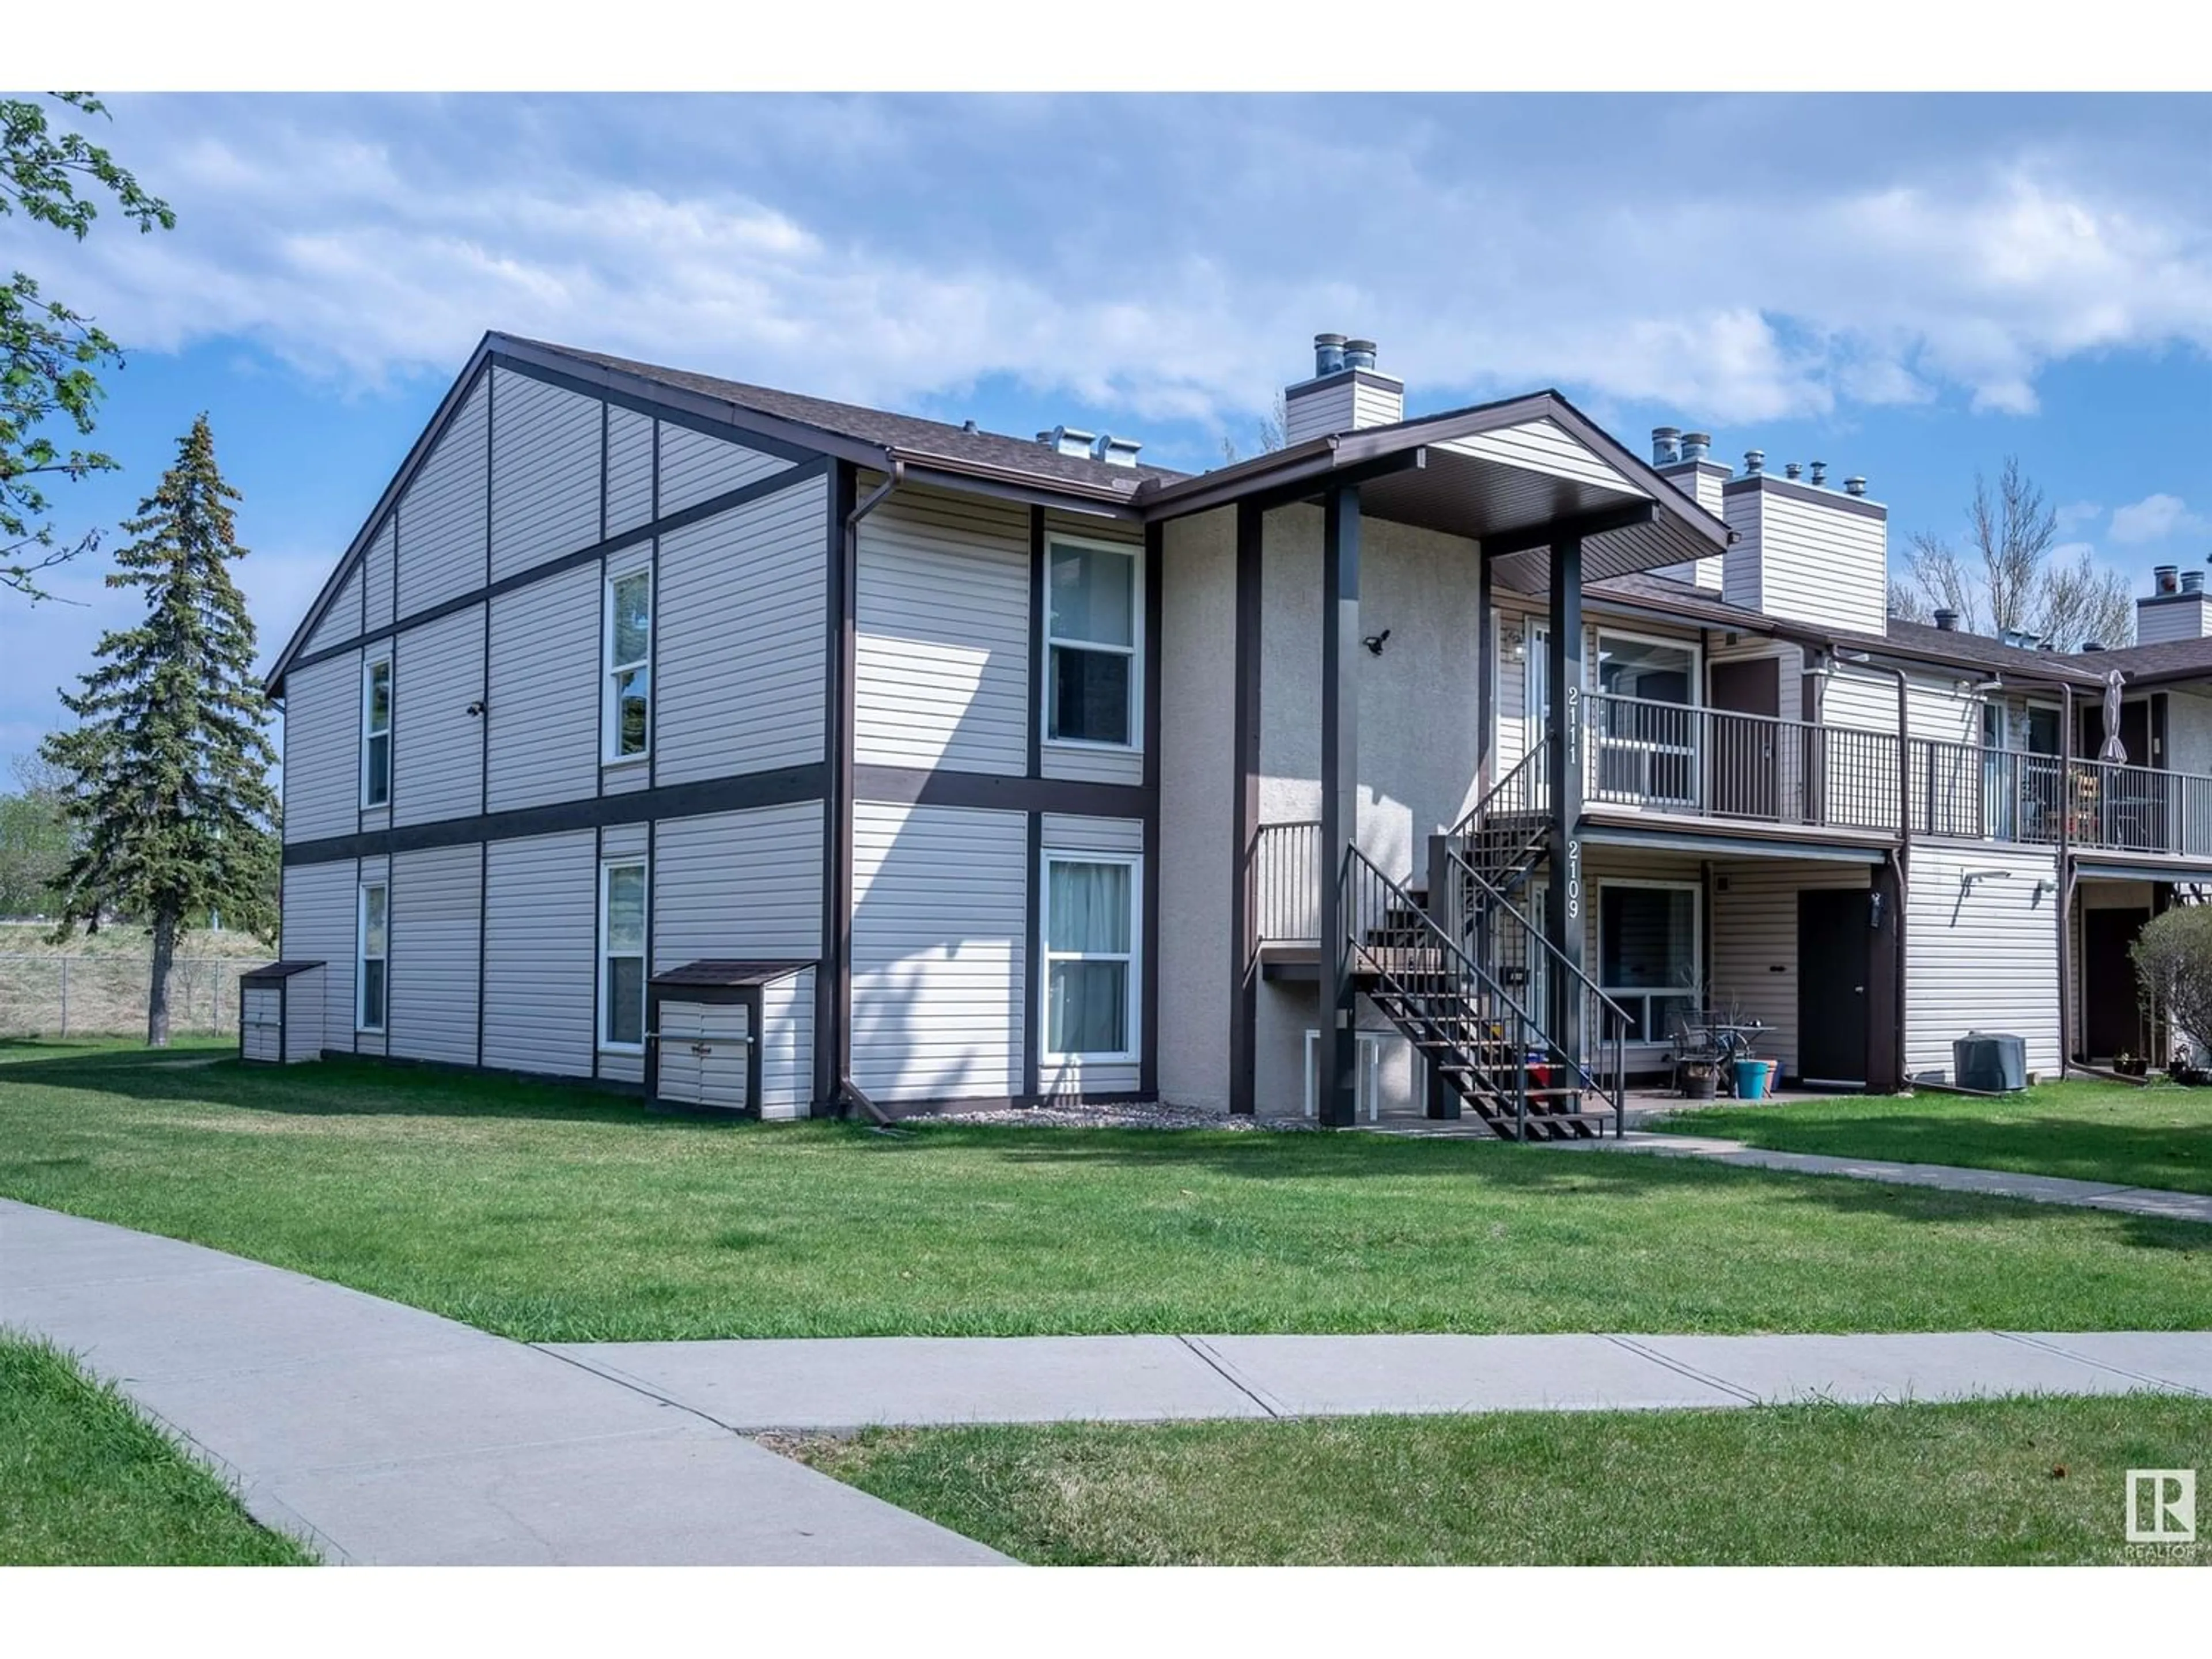 A pic from exterior of the house or condo for 2111 SADDLEBACK RD NW, Edmonton Alberta T6J4T4